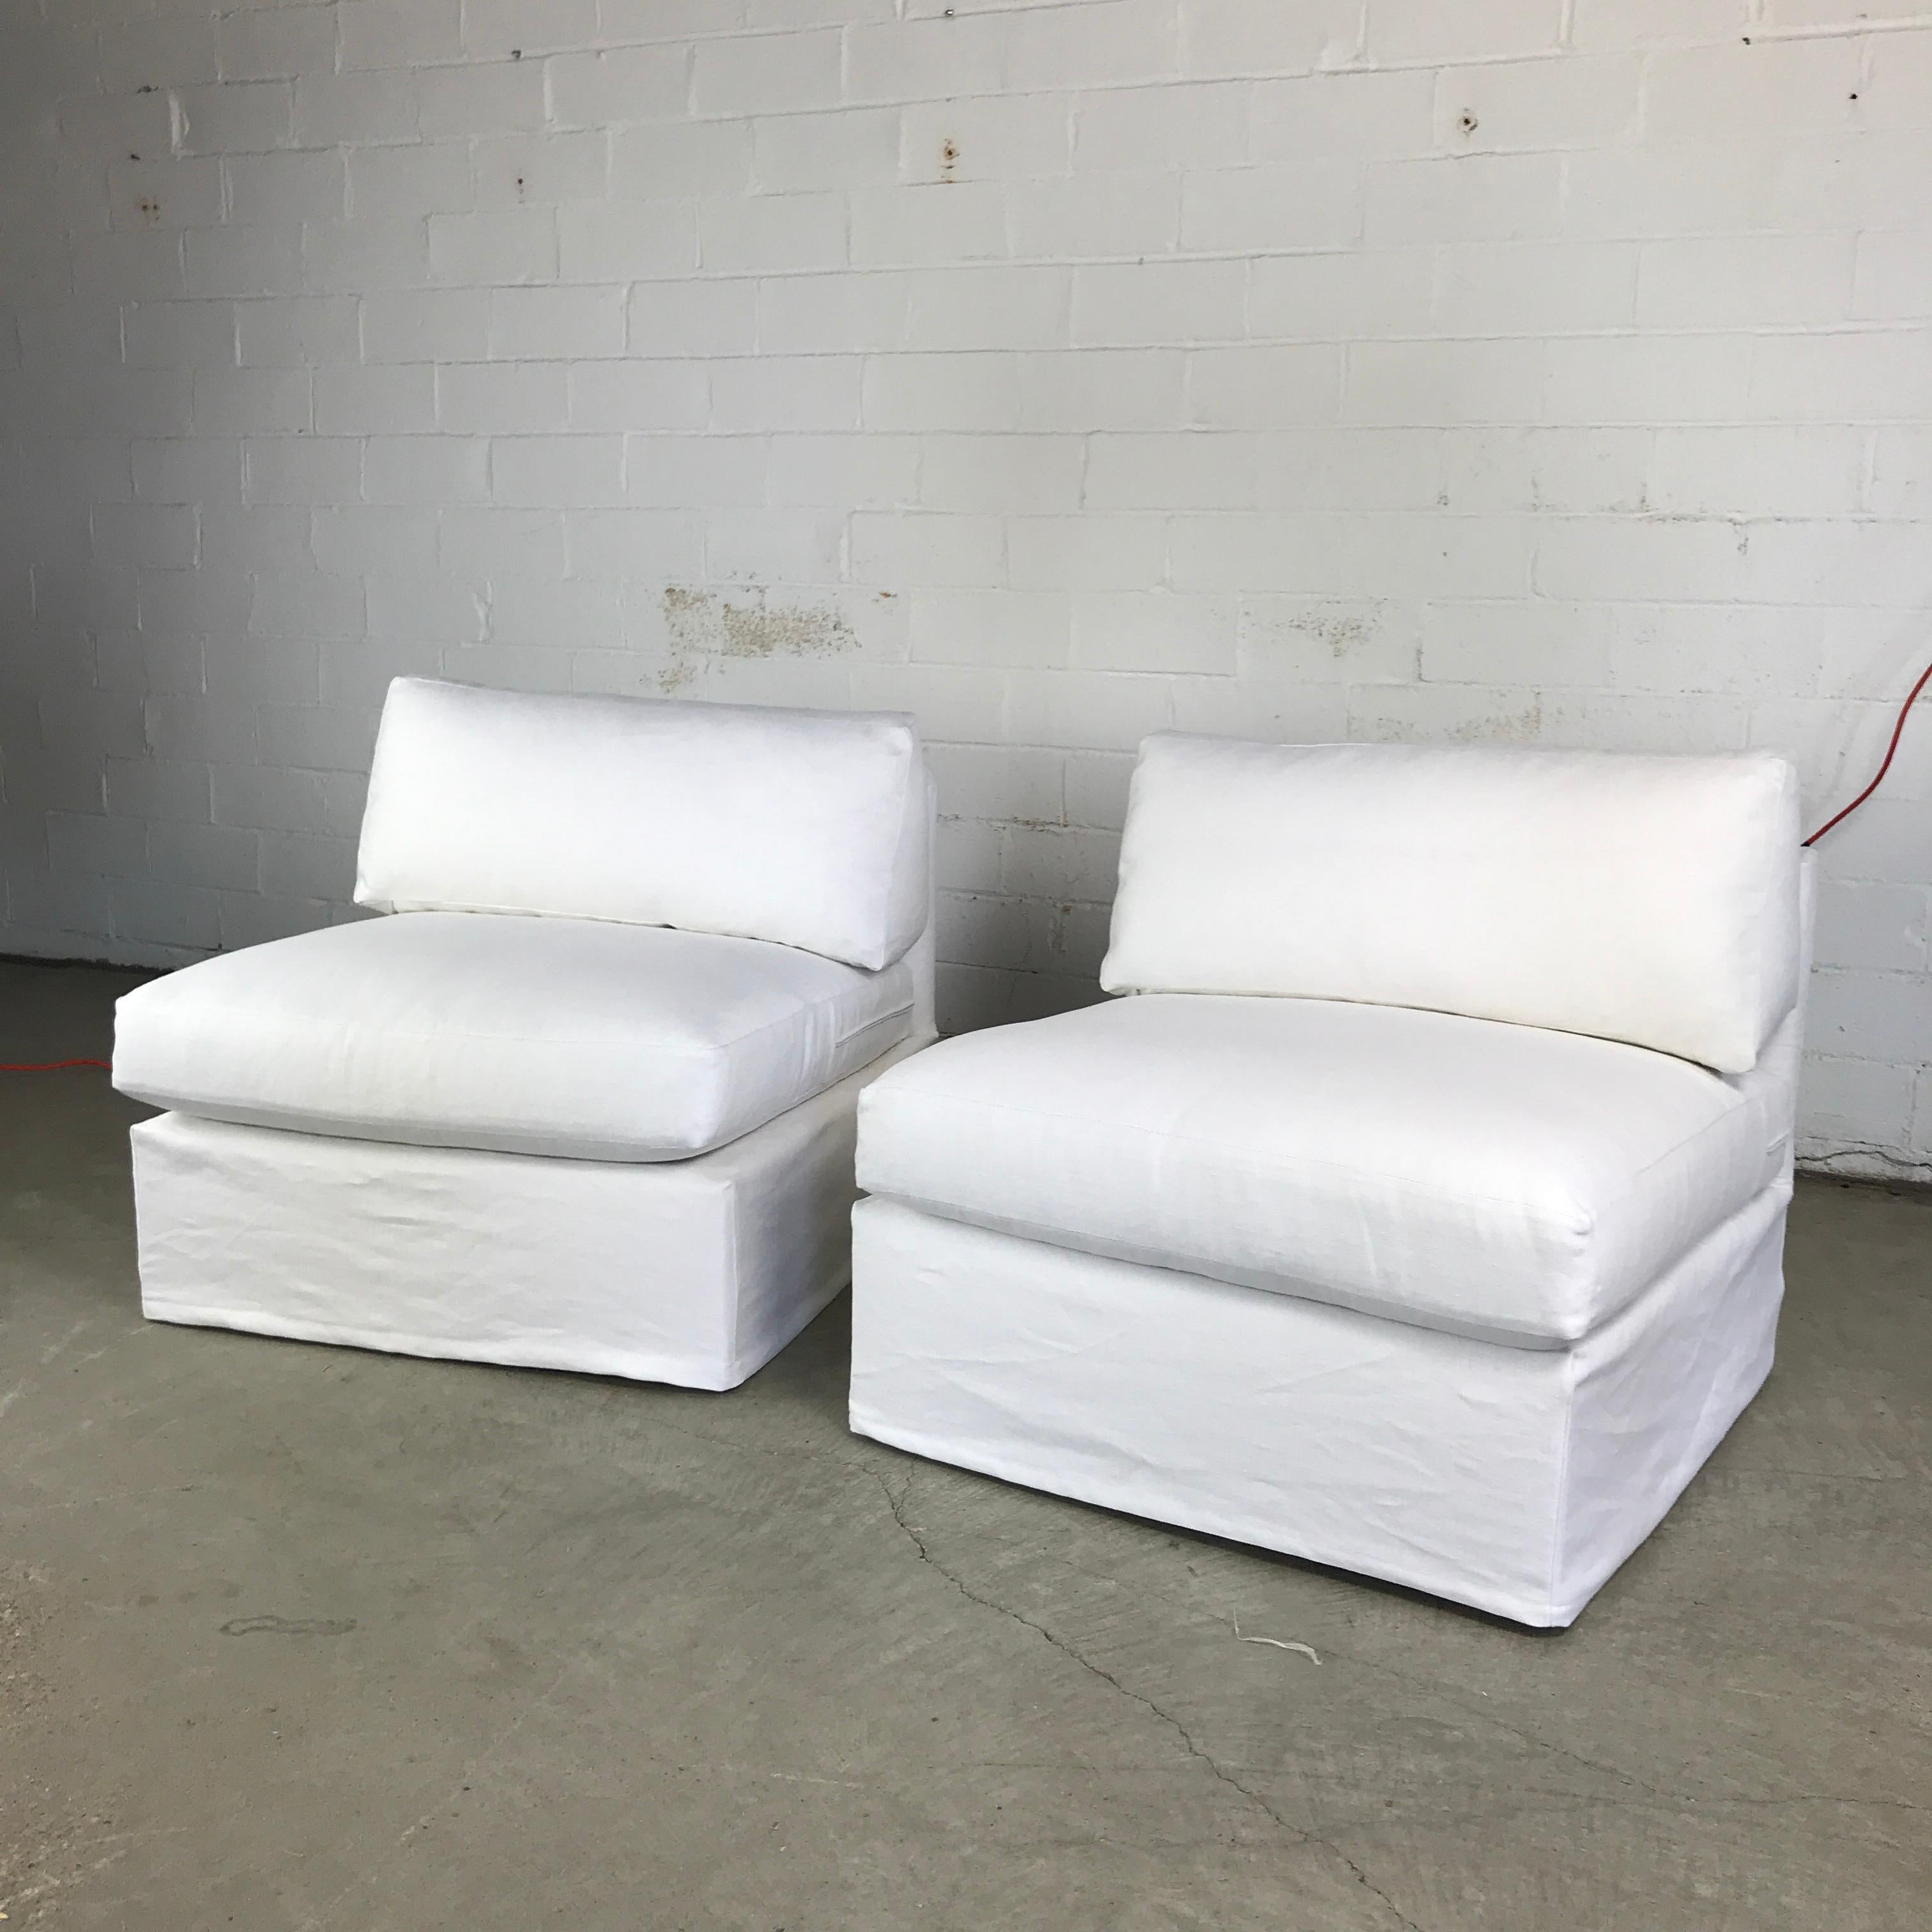 slip covers for slipper chairs